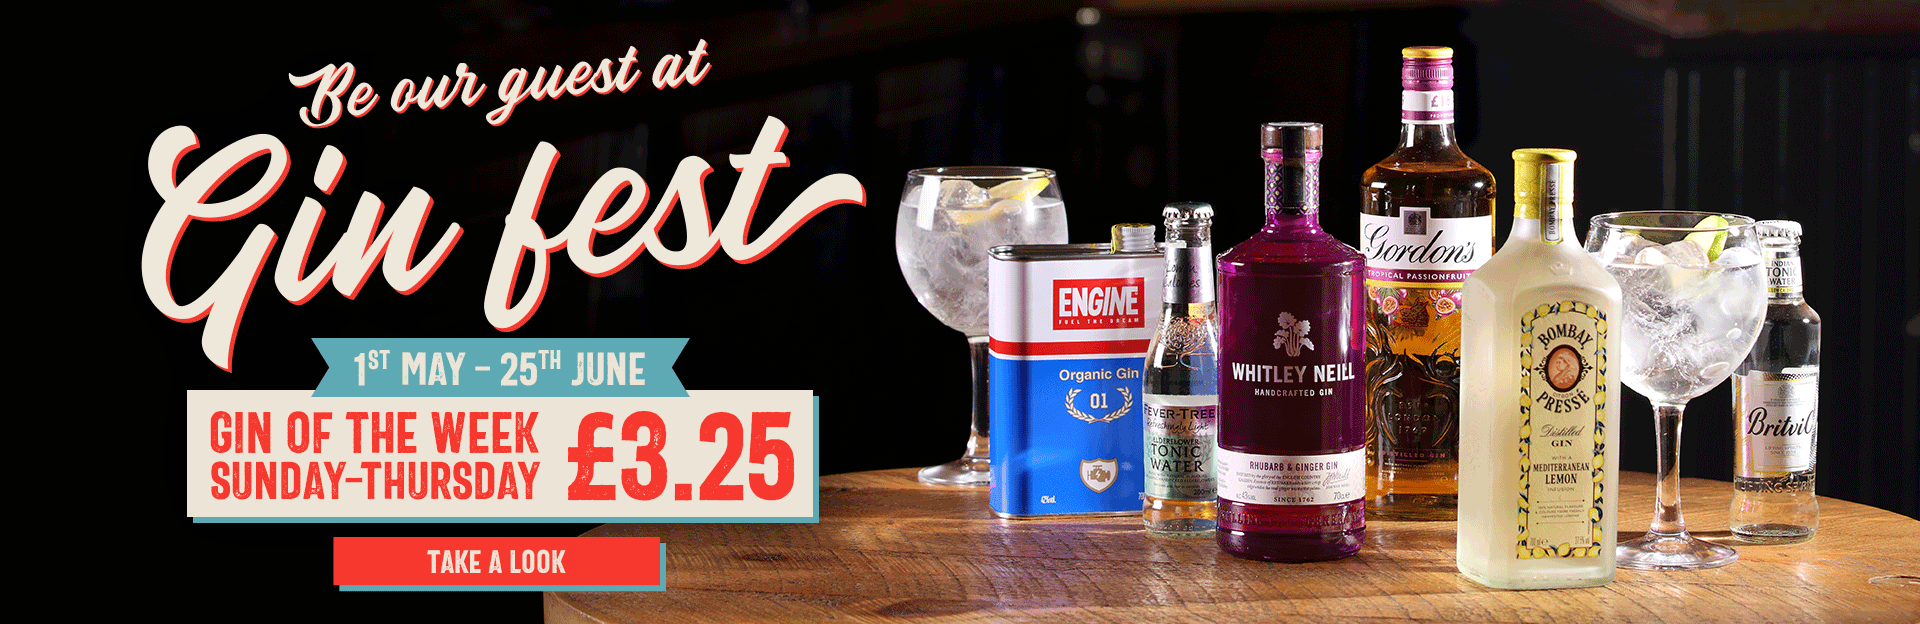 Gin Fest at The White Horse